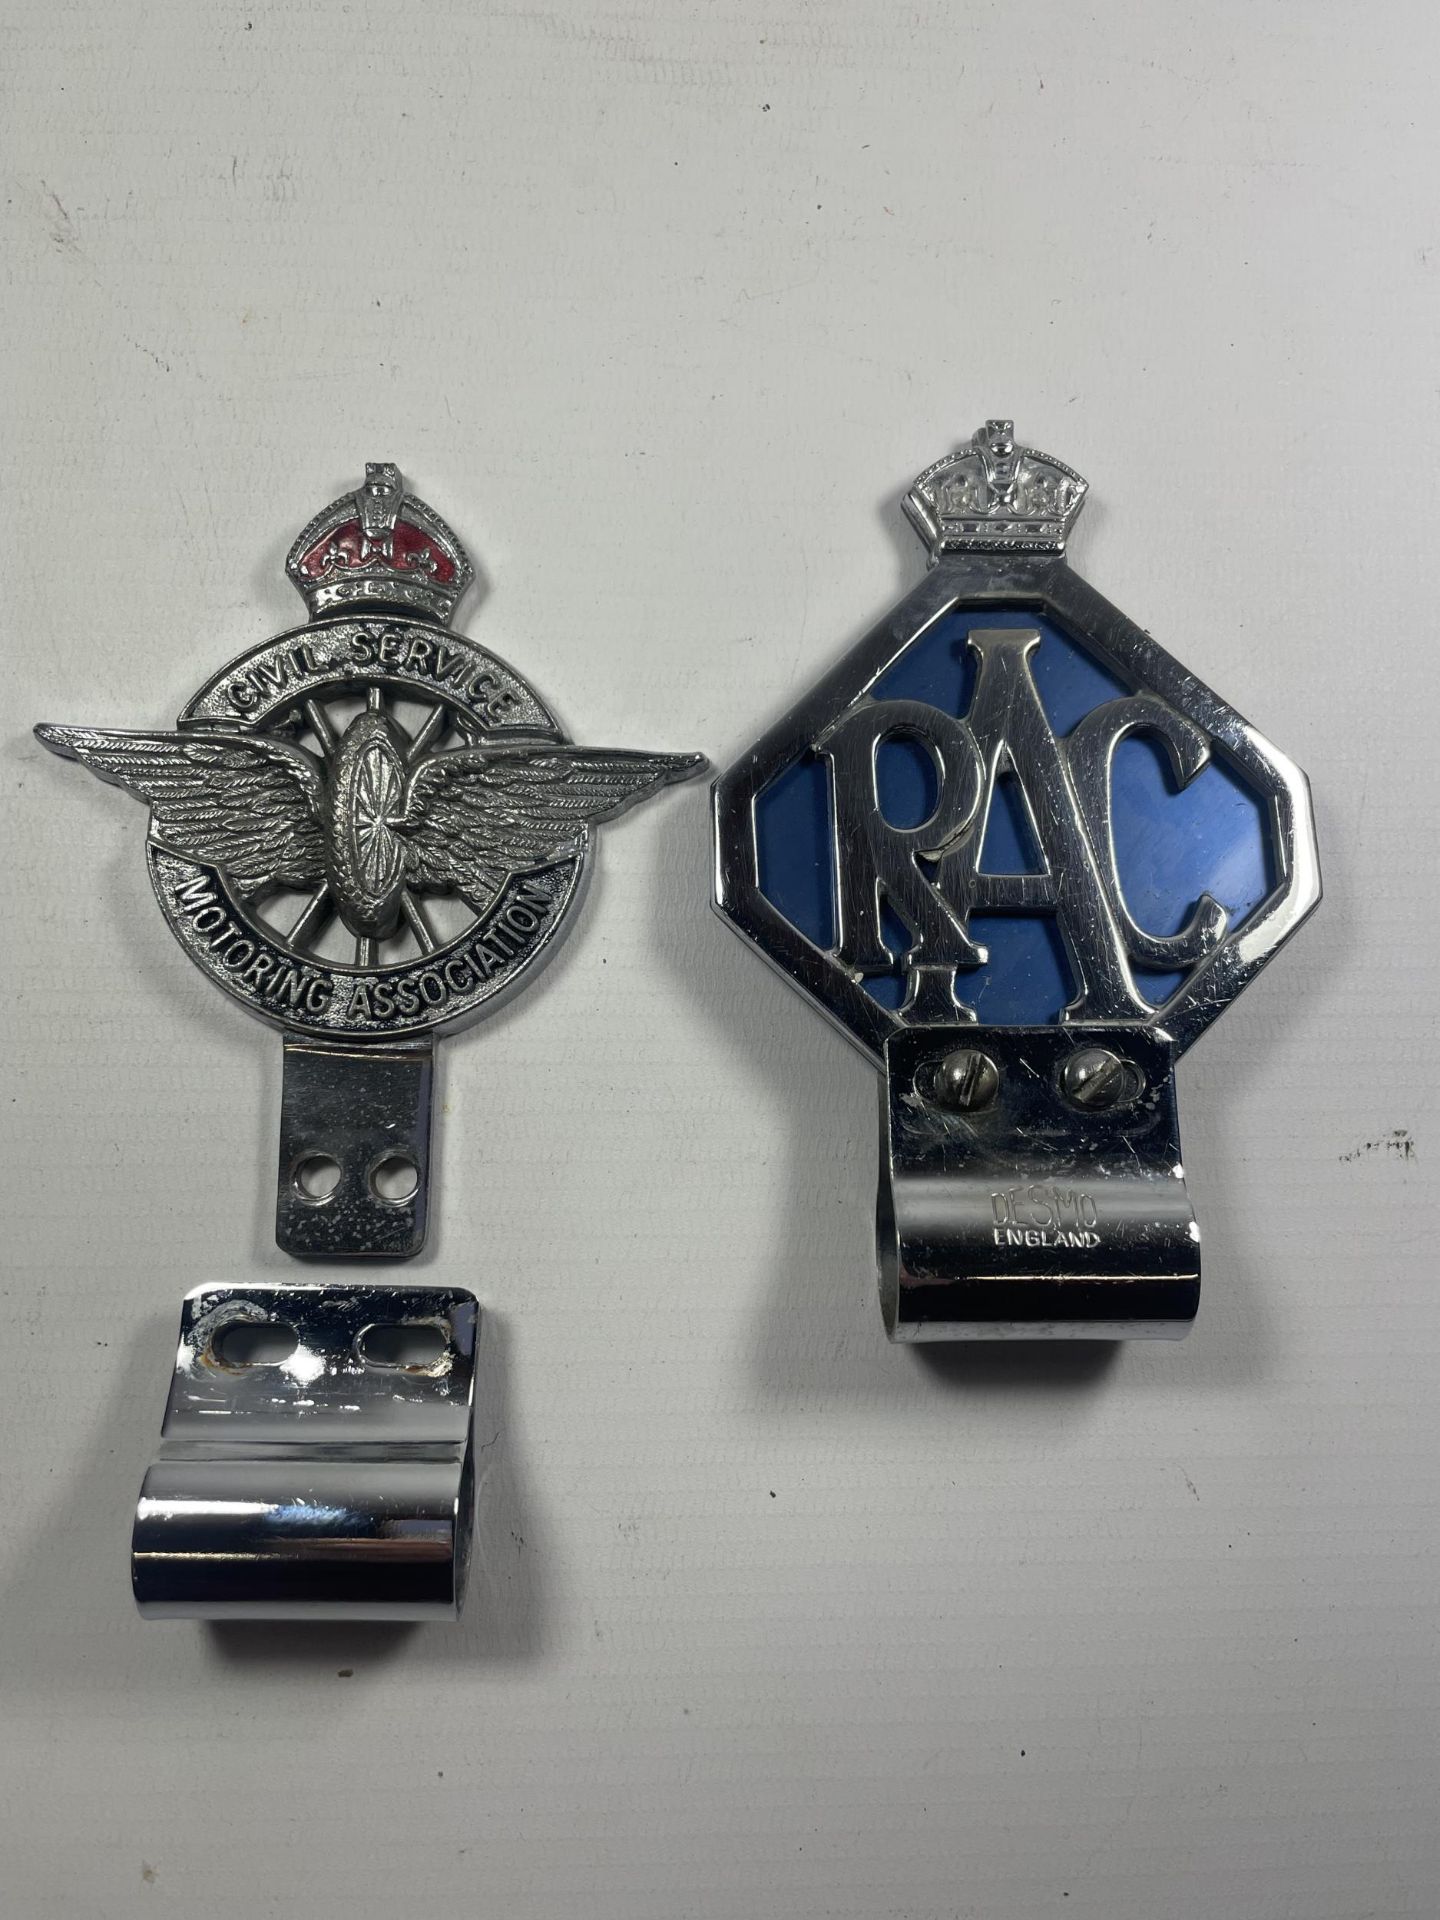 TWO VINTAGE BUMPER BADGES WITH CLIPS TO INCLUDE RAC AND CIVIL SERVICE MOTORING ASSOCIATION